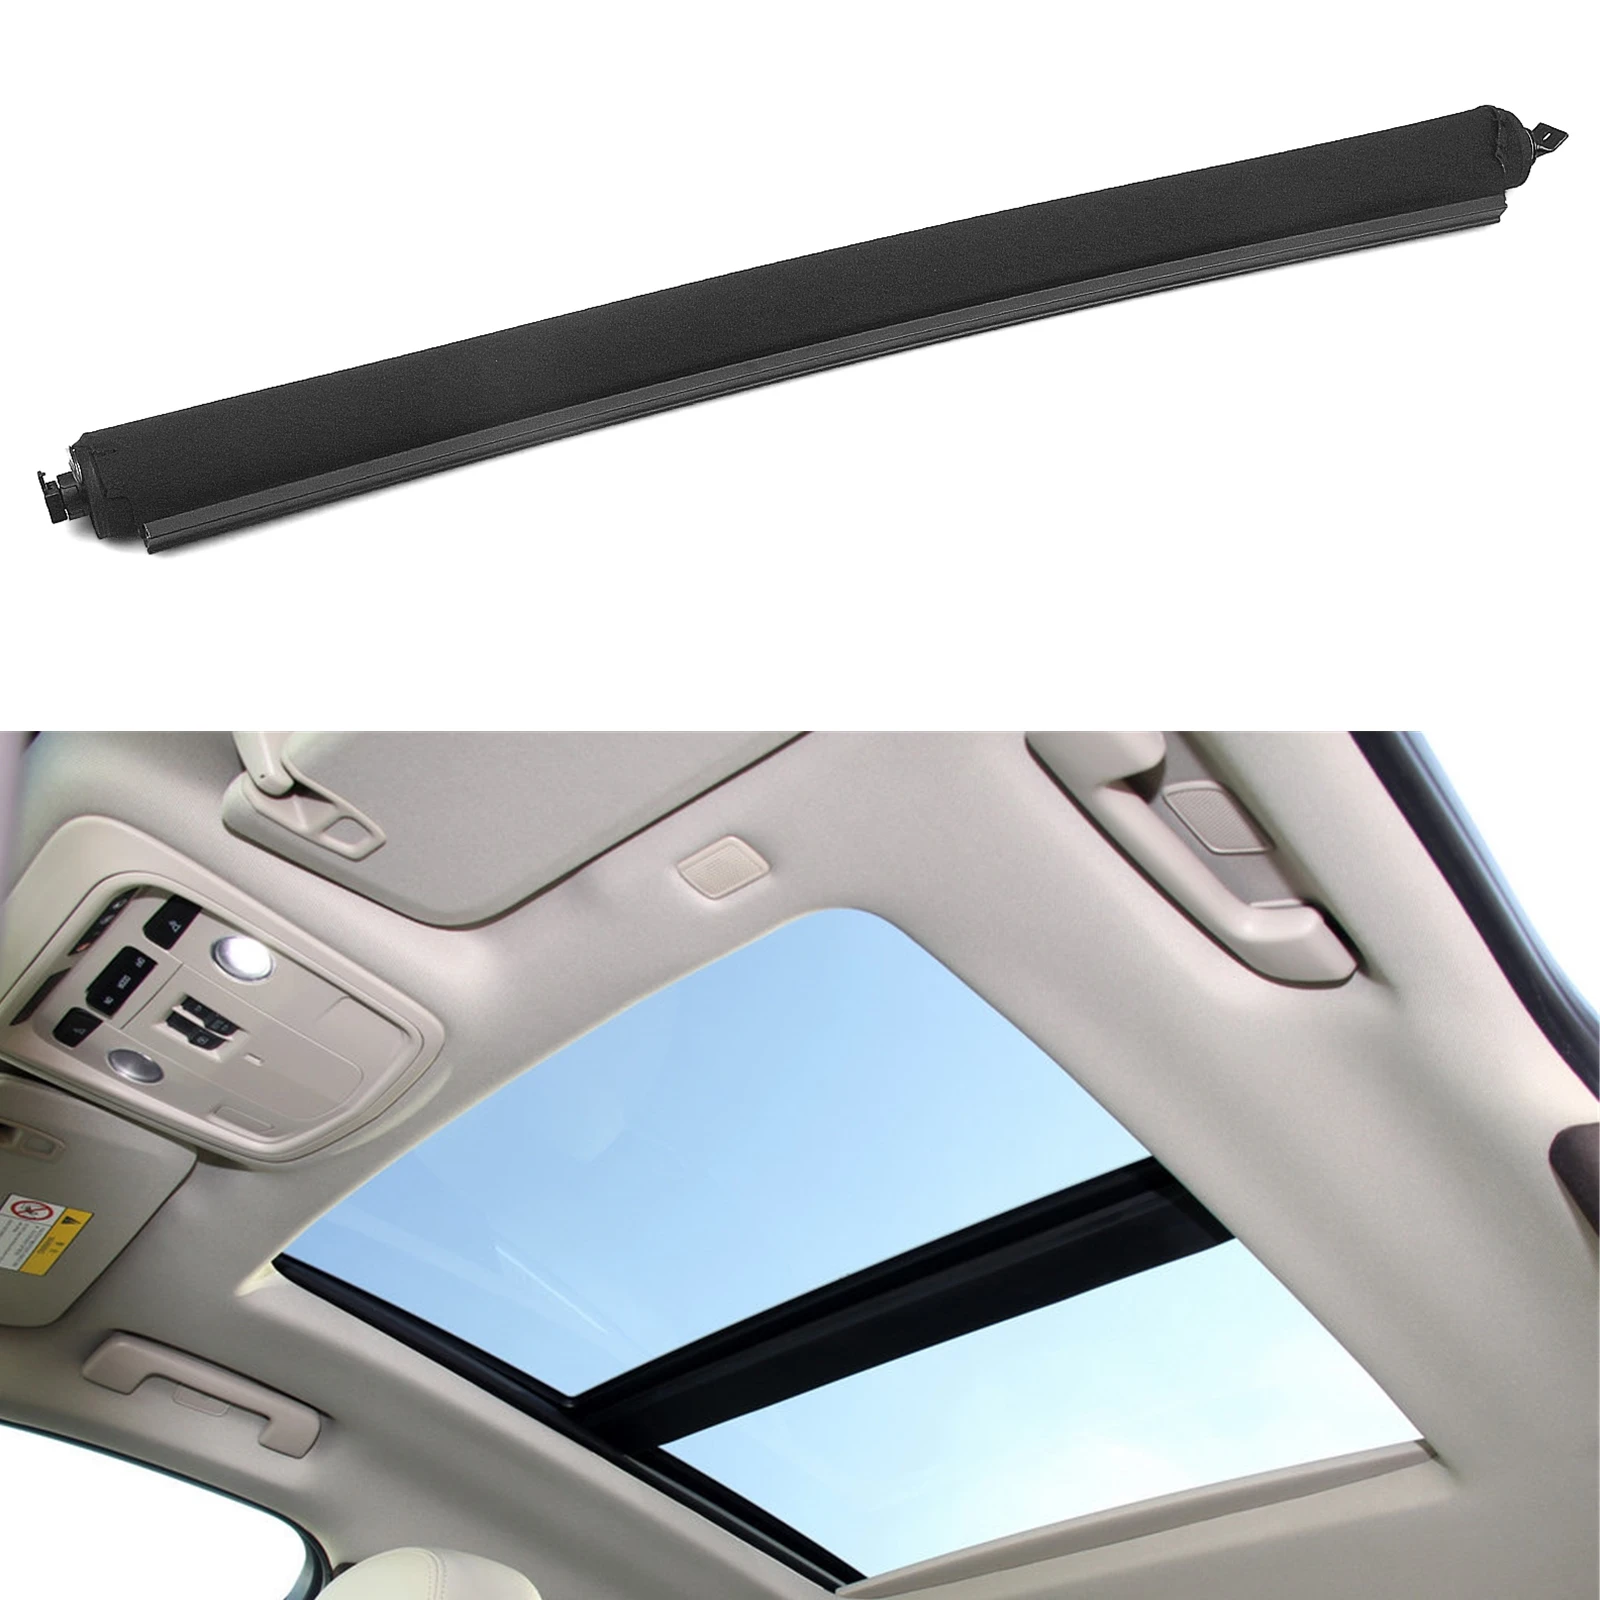 Black Gray Car Sunroof Shade Cover Curtain Window Dome Sun Roof Shield Roller Sunshade Replacement For Cadillac XTS 2013-2018